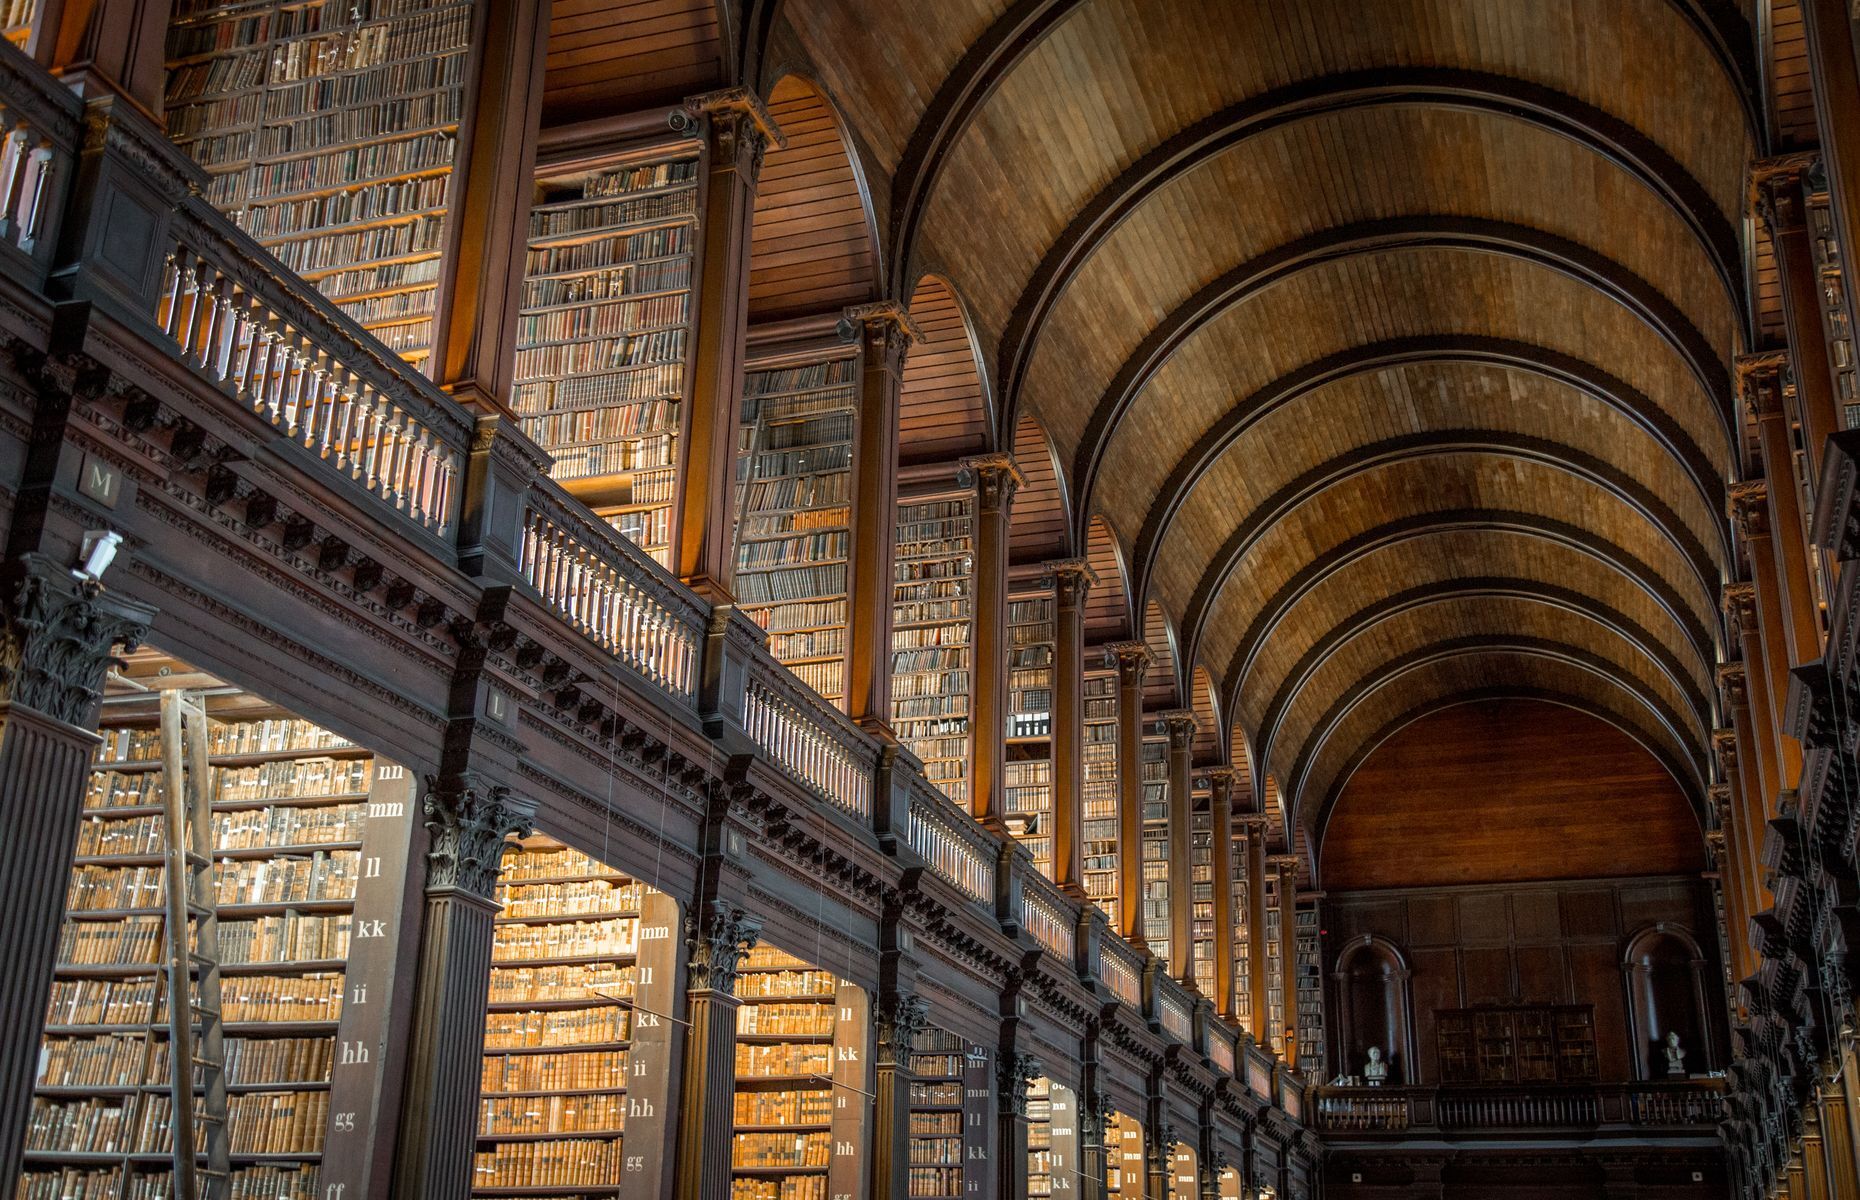 <p>Founded by Elizabeth I in 1592, <a href="https://www.lonelyplanet.com/ireland/dublin/attractions/trinity-college/a/poi-sig/1213616/359796" rel="noreferrer noopener">Trinity College</a> is Ireland’s most prestigious university and where writers Oscar Wilde, Jonathan Swift, and Samuel Beckett studied. Visitors to its sublime library will find the Long Room, housing classics of Irish literature as well as the <em>Book of </em><em>Kells</em>, a manuscript from the 9th century.</p>